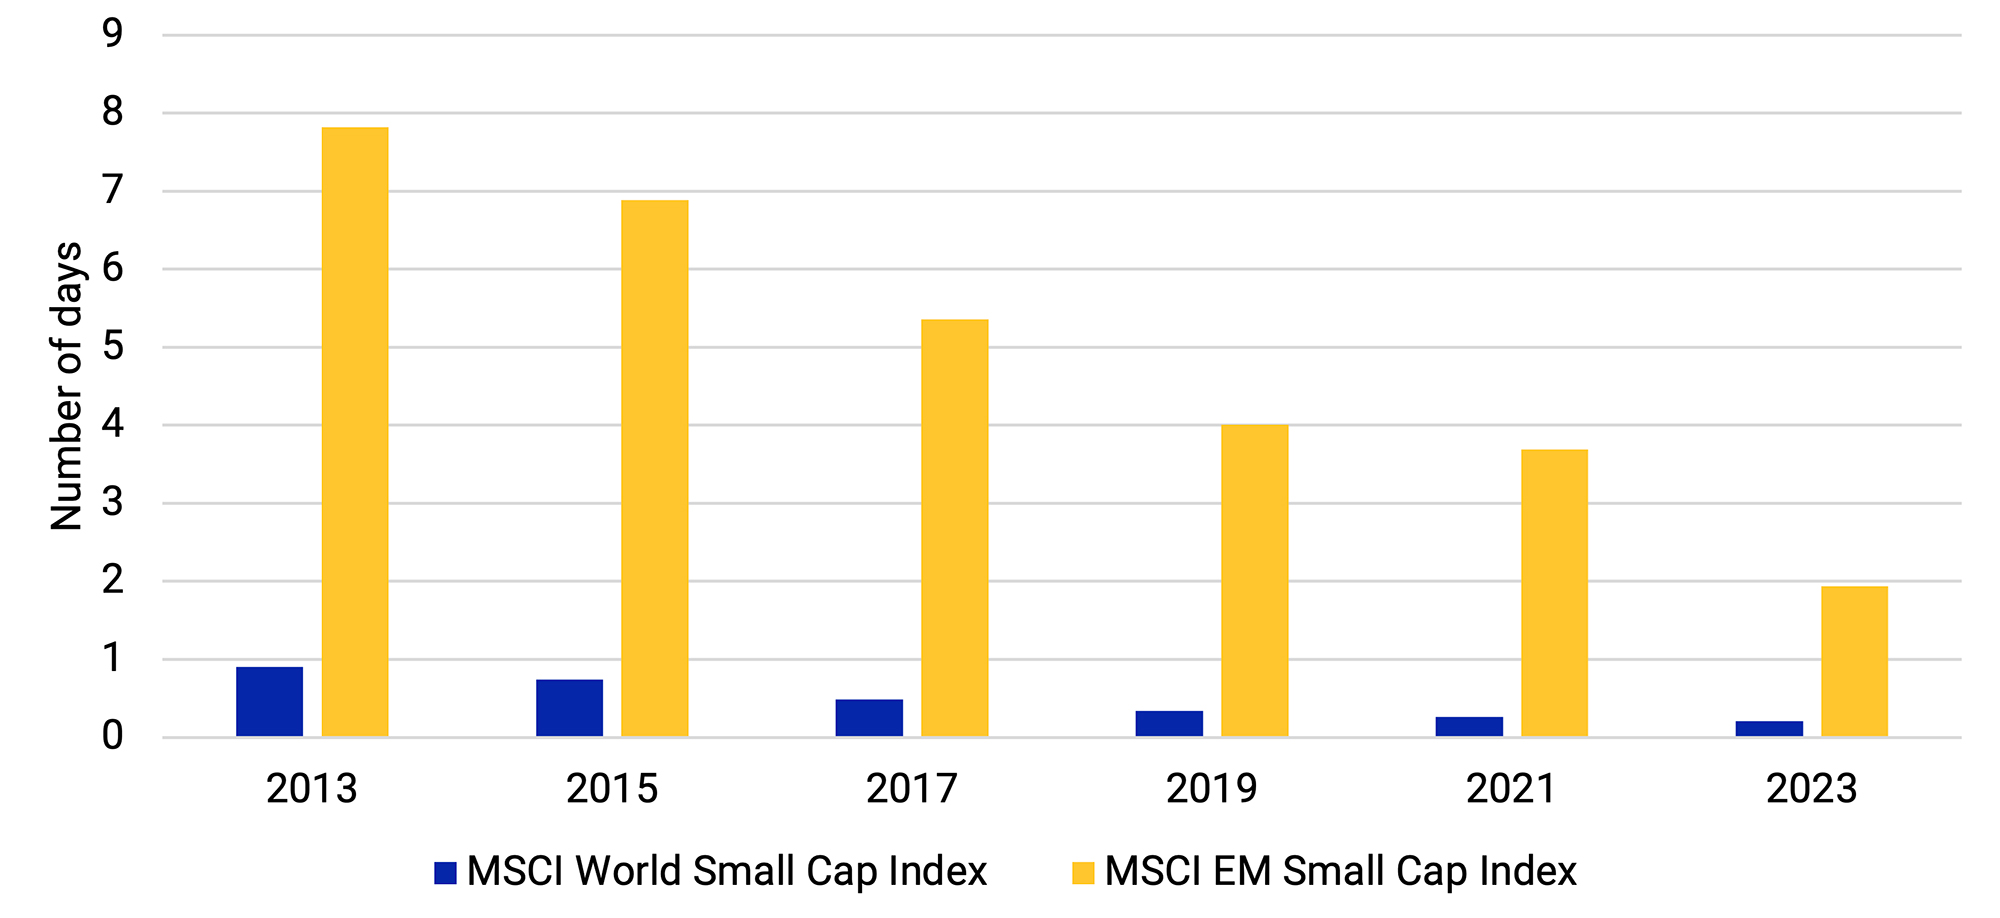 This figure is a bar chart that shows the average number of days to complete 95% of all trading for the last four index reviews of the MSCI World Small Cap Index and the MSCI Emerging Markets Small Cap Index as of the end of May for each year shown: 2013, 2015, 2017, 2019, 2021 and 2023. The fund size assumed is USD 1 billion with a maximum daily trading limit of 20%